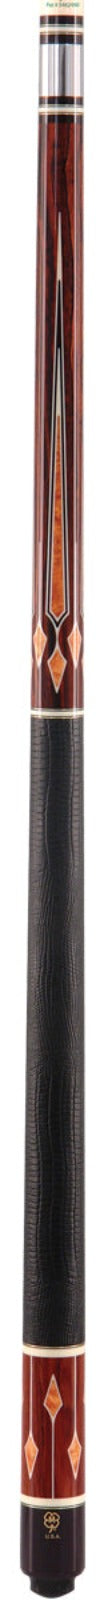 McDermott G701 - Comes with i-2 Shaft Pool Cue